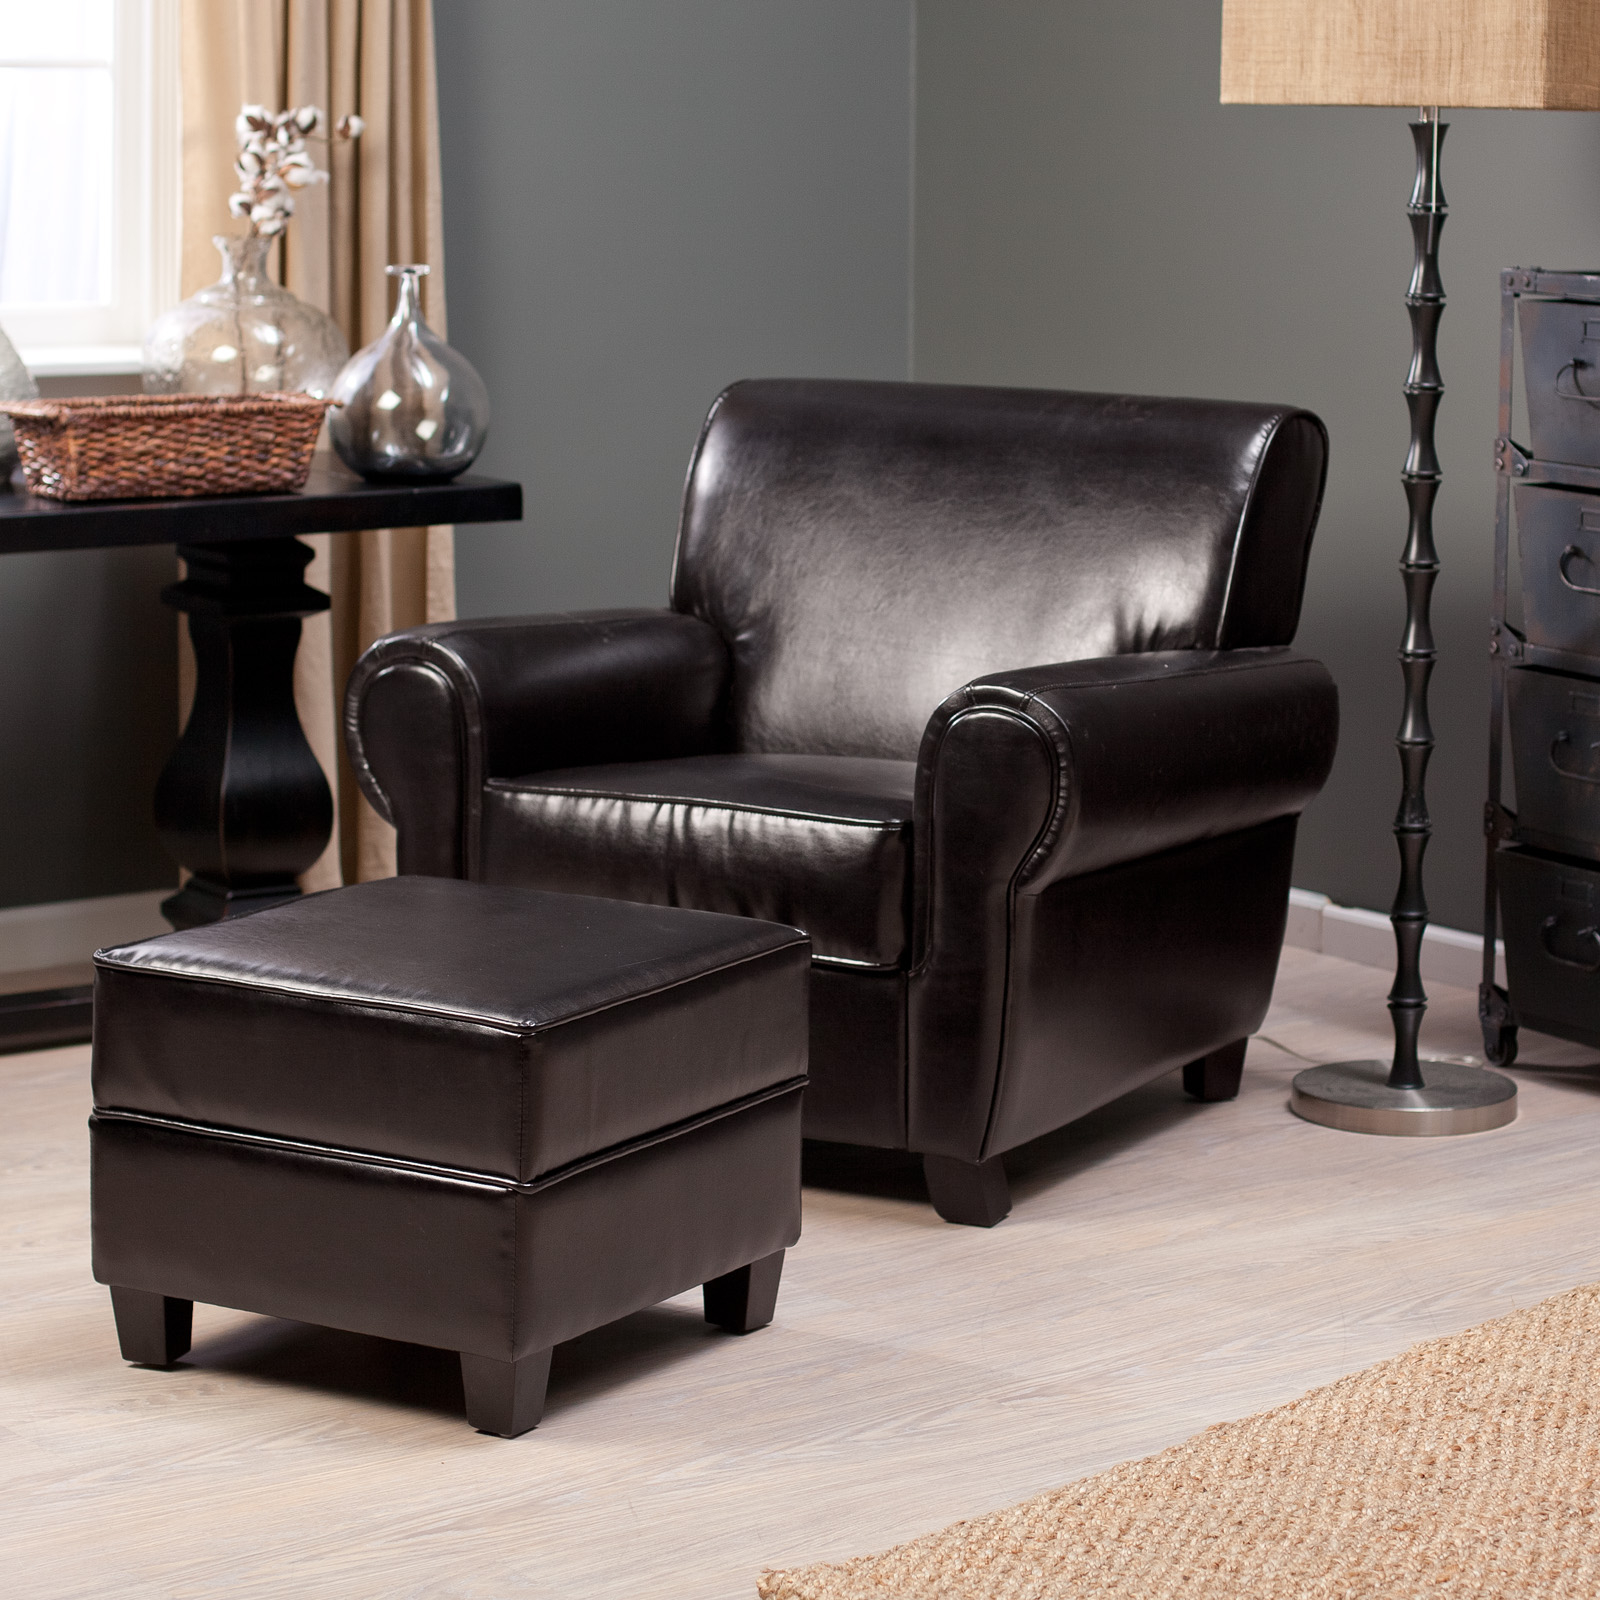 Belham Living Belham Living Sonoma Leather Club Chair and Storage Ottoman, Brown, Leather